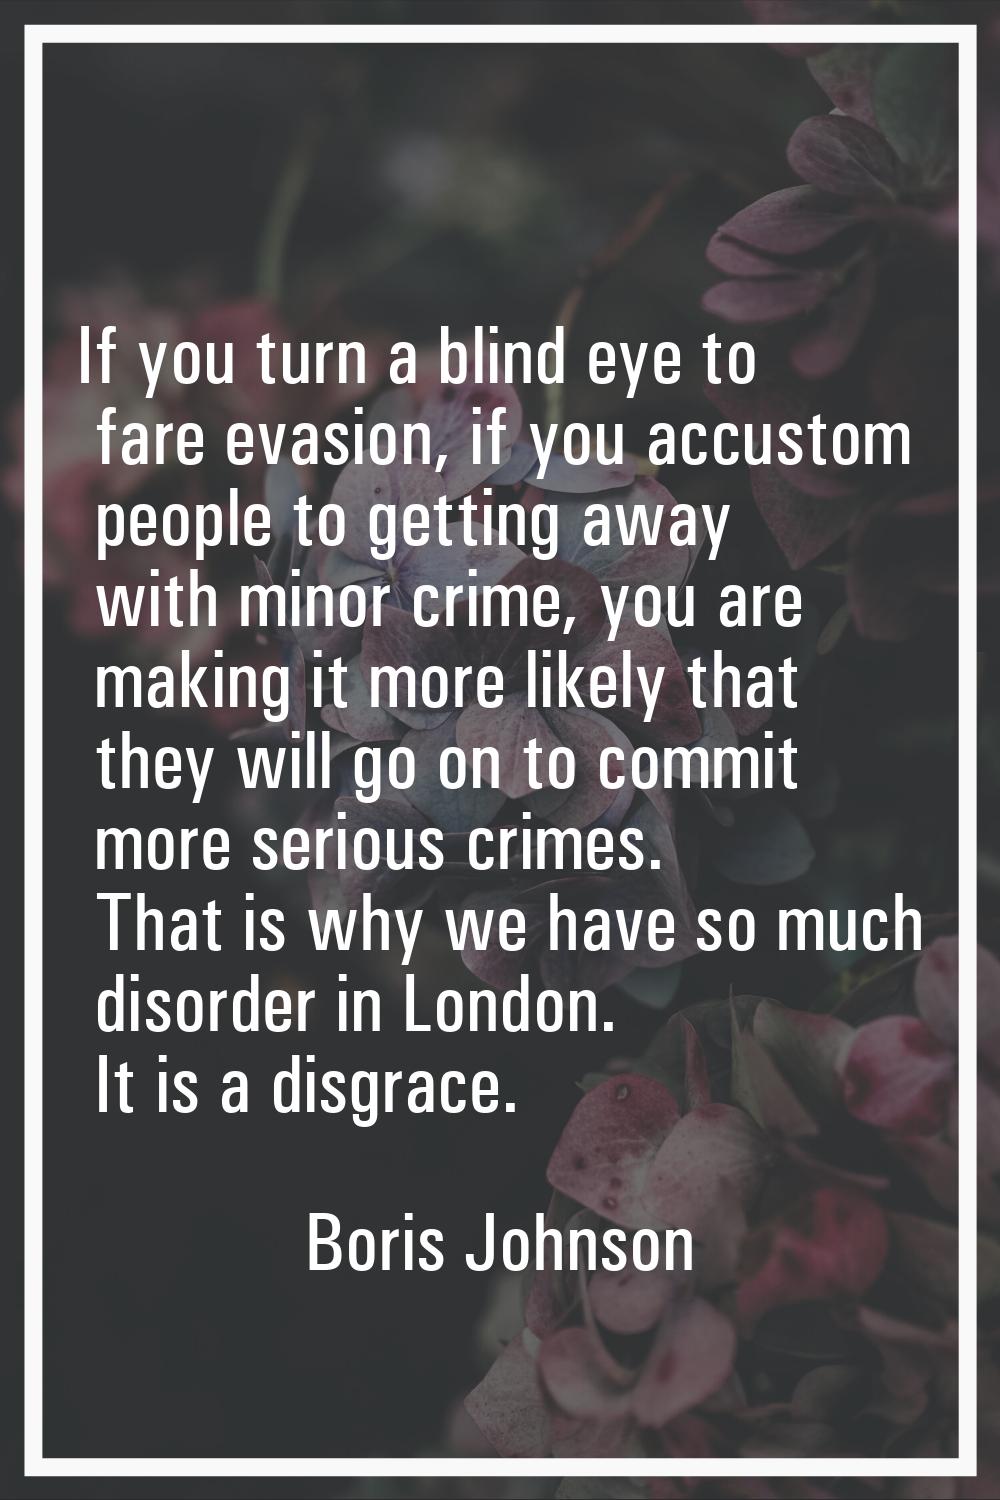 If you turn a blind eye to fare evasion, if you accustom people to getting away with minor crime, y